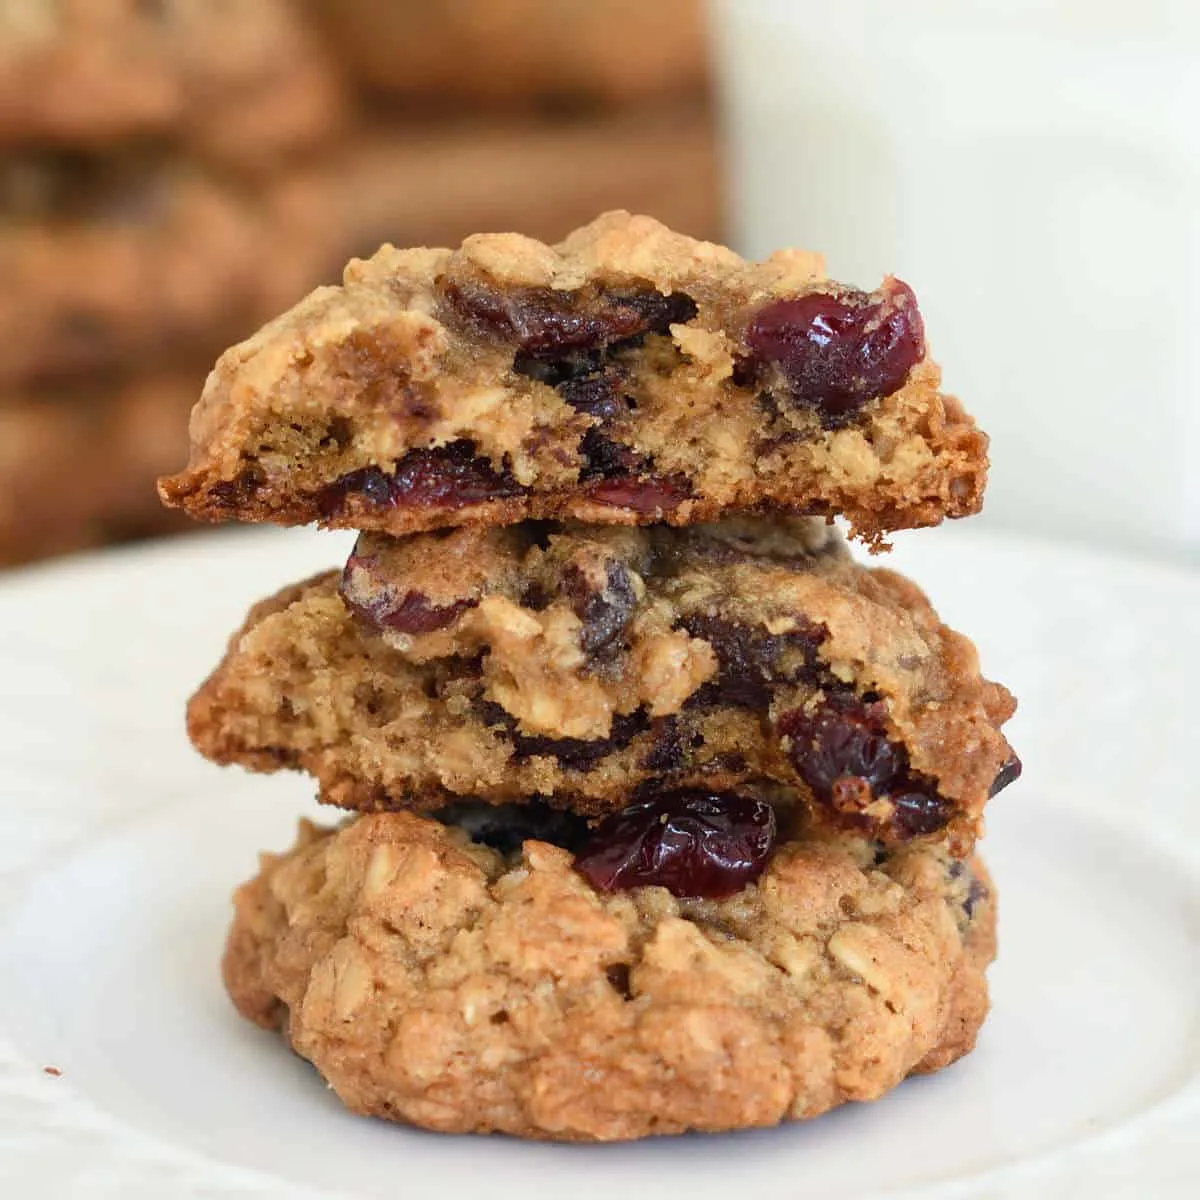 a stack of oatmeal cranberry chocolate chip cookies on a plate. One cookie is split to show the inside